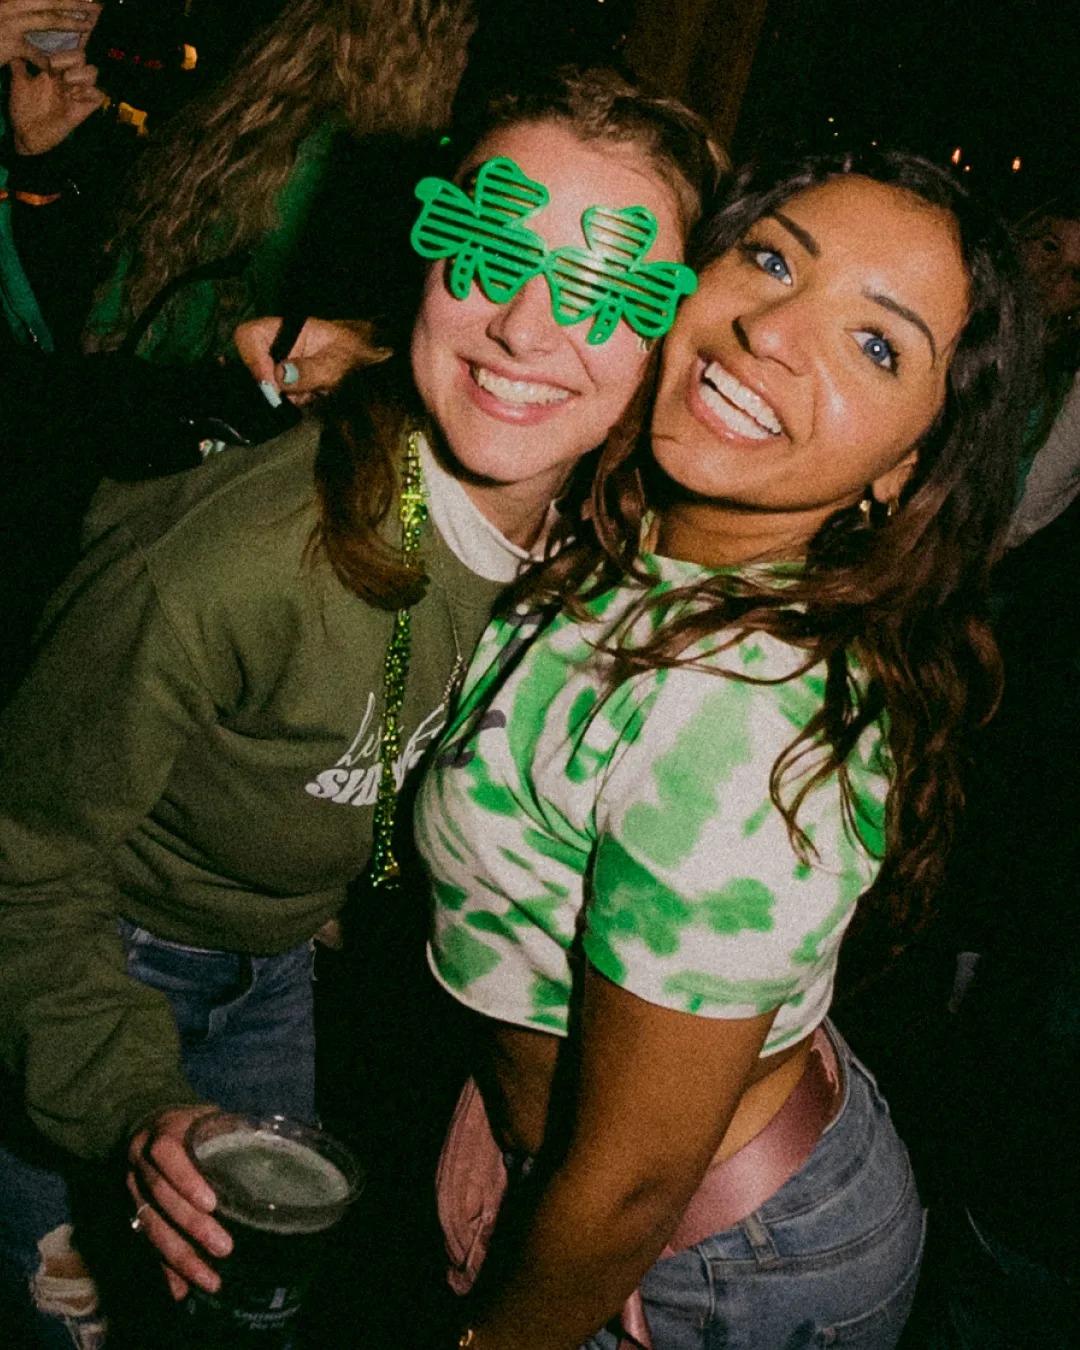 Lively ladies lighting up the scene with their green st patricks themed outfits and shamrock glasses diving into the festive spirit of the irish bar crawl
